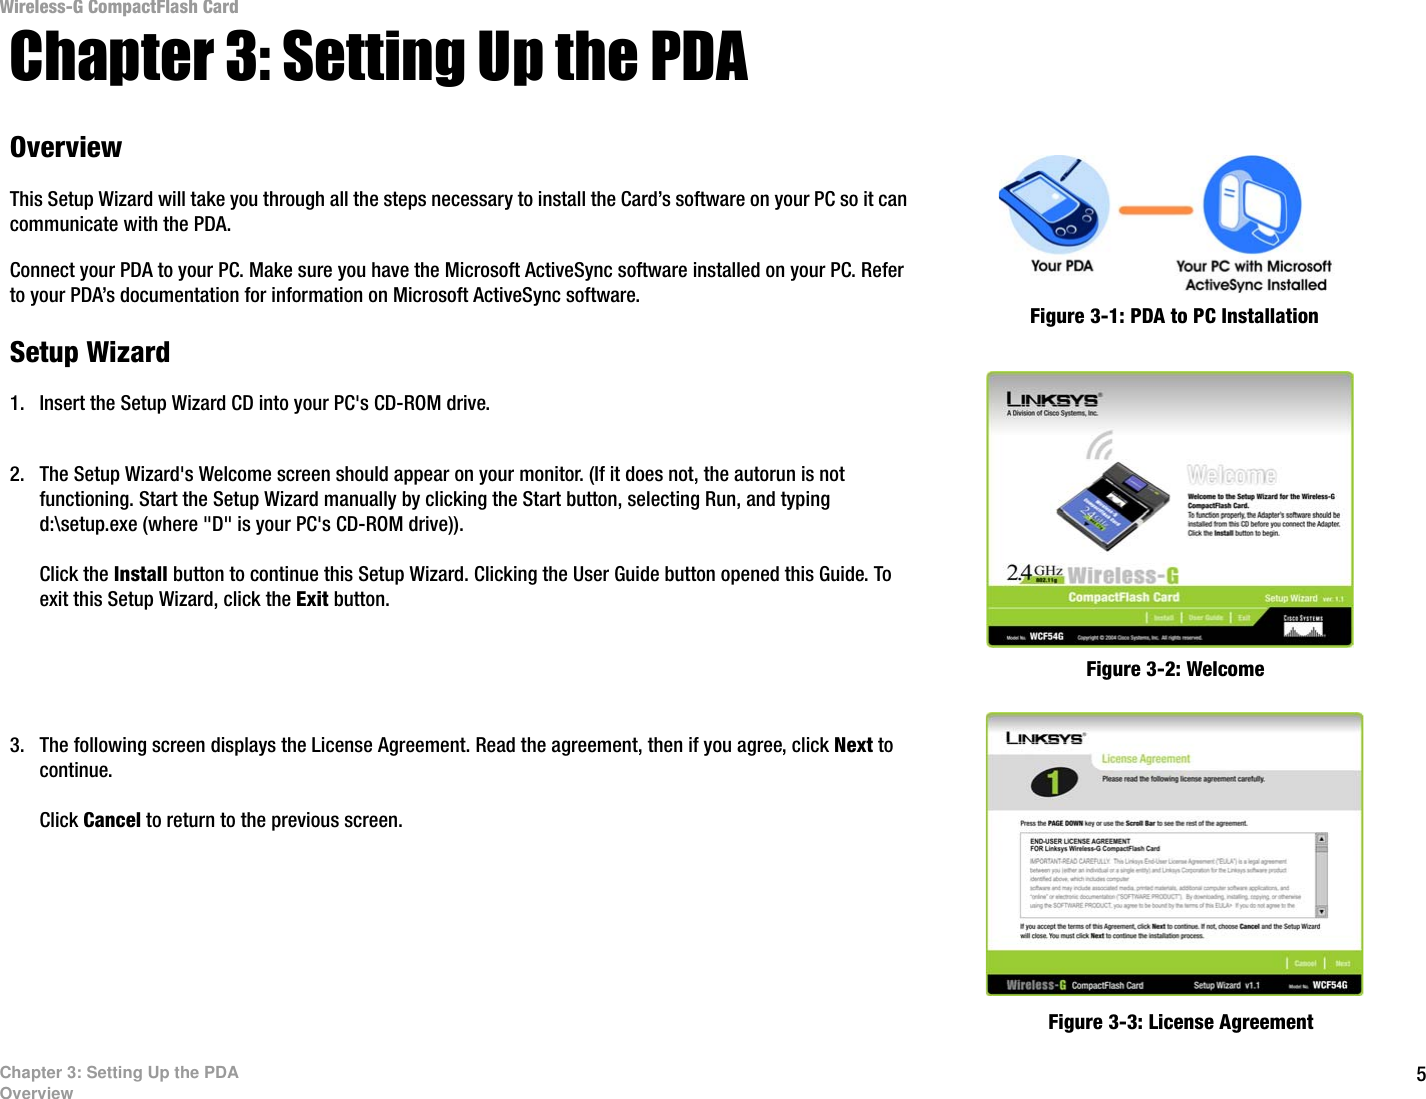 5Chapter 3: Setting Up the PDAOverviewWireless-G CompactFlash CardChapter 3: Setting Up the PDAOverviewThis Setup Wizard will take you through all the steps necessary to install the Card’s software on your PC so it can communicate with the PDA.Connect your PDA to your PC. Make sure you have the Microsoft ActiveSync software installed on your PC. Refer to your PDA’s documentation for information on Microsoft ActiveSync software. Setup Wizard1. Insert the Setup Wizard CD into your PC&apos;s CD-ROM drive. 2. The Setup Wizard&apos;s Welcome screen should appear on your monitor. (If it does not, the autorun is not functioning. Start the Setup Wizard manually by clicking the Start button, selecting Run, and typing d:\setup.exe (where &quot;D&quot; is your PC&apos;s CD-ROM drive)). Click the Install button to continue this Setup Wizard. Clicking the User Guide button opened this Guide. To exit this Setup Wizard, click the Exit button.3. The following screen displays the License Agreement. Read the agreement, then if you agree, click Next to continue. Click Cancel to return to the previous screen. Figure 3-3: License AgreementFigure 3-1: PDA to PC InstallationFigure 3-2: Welcome